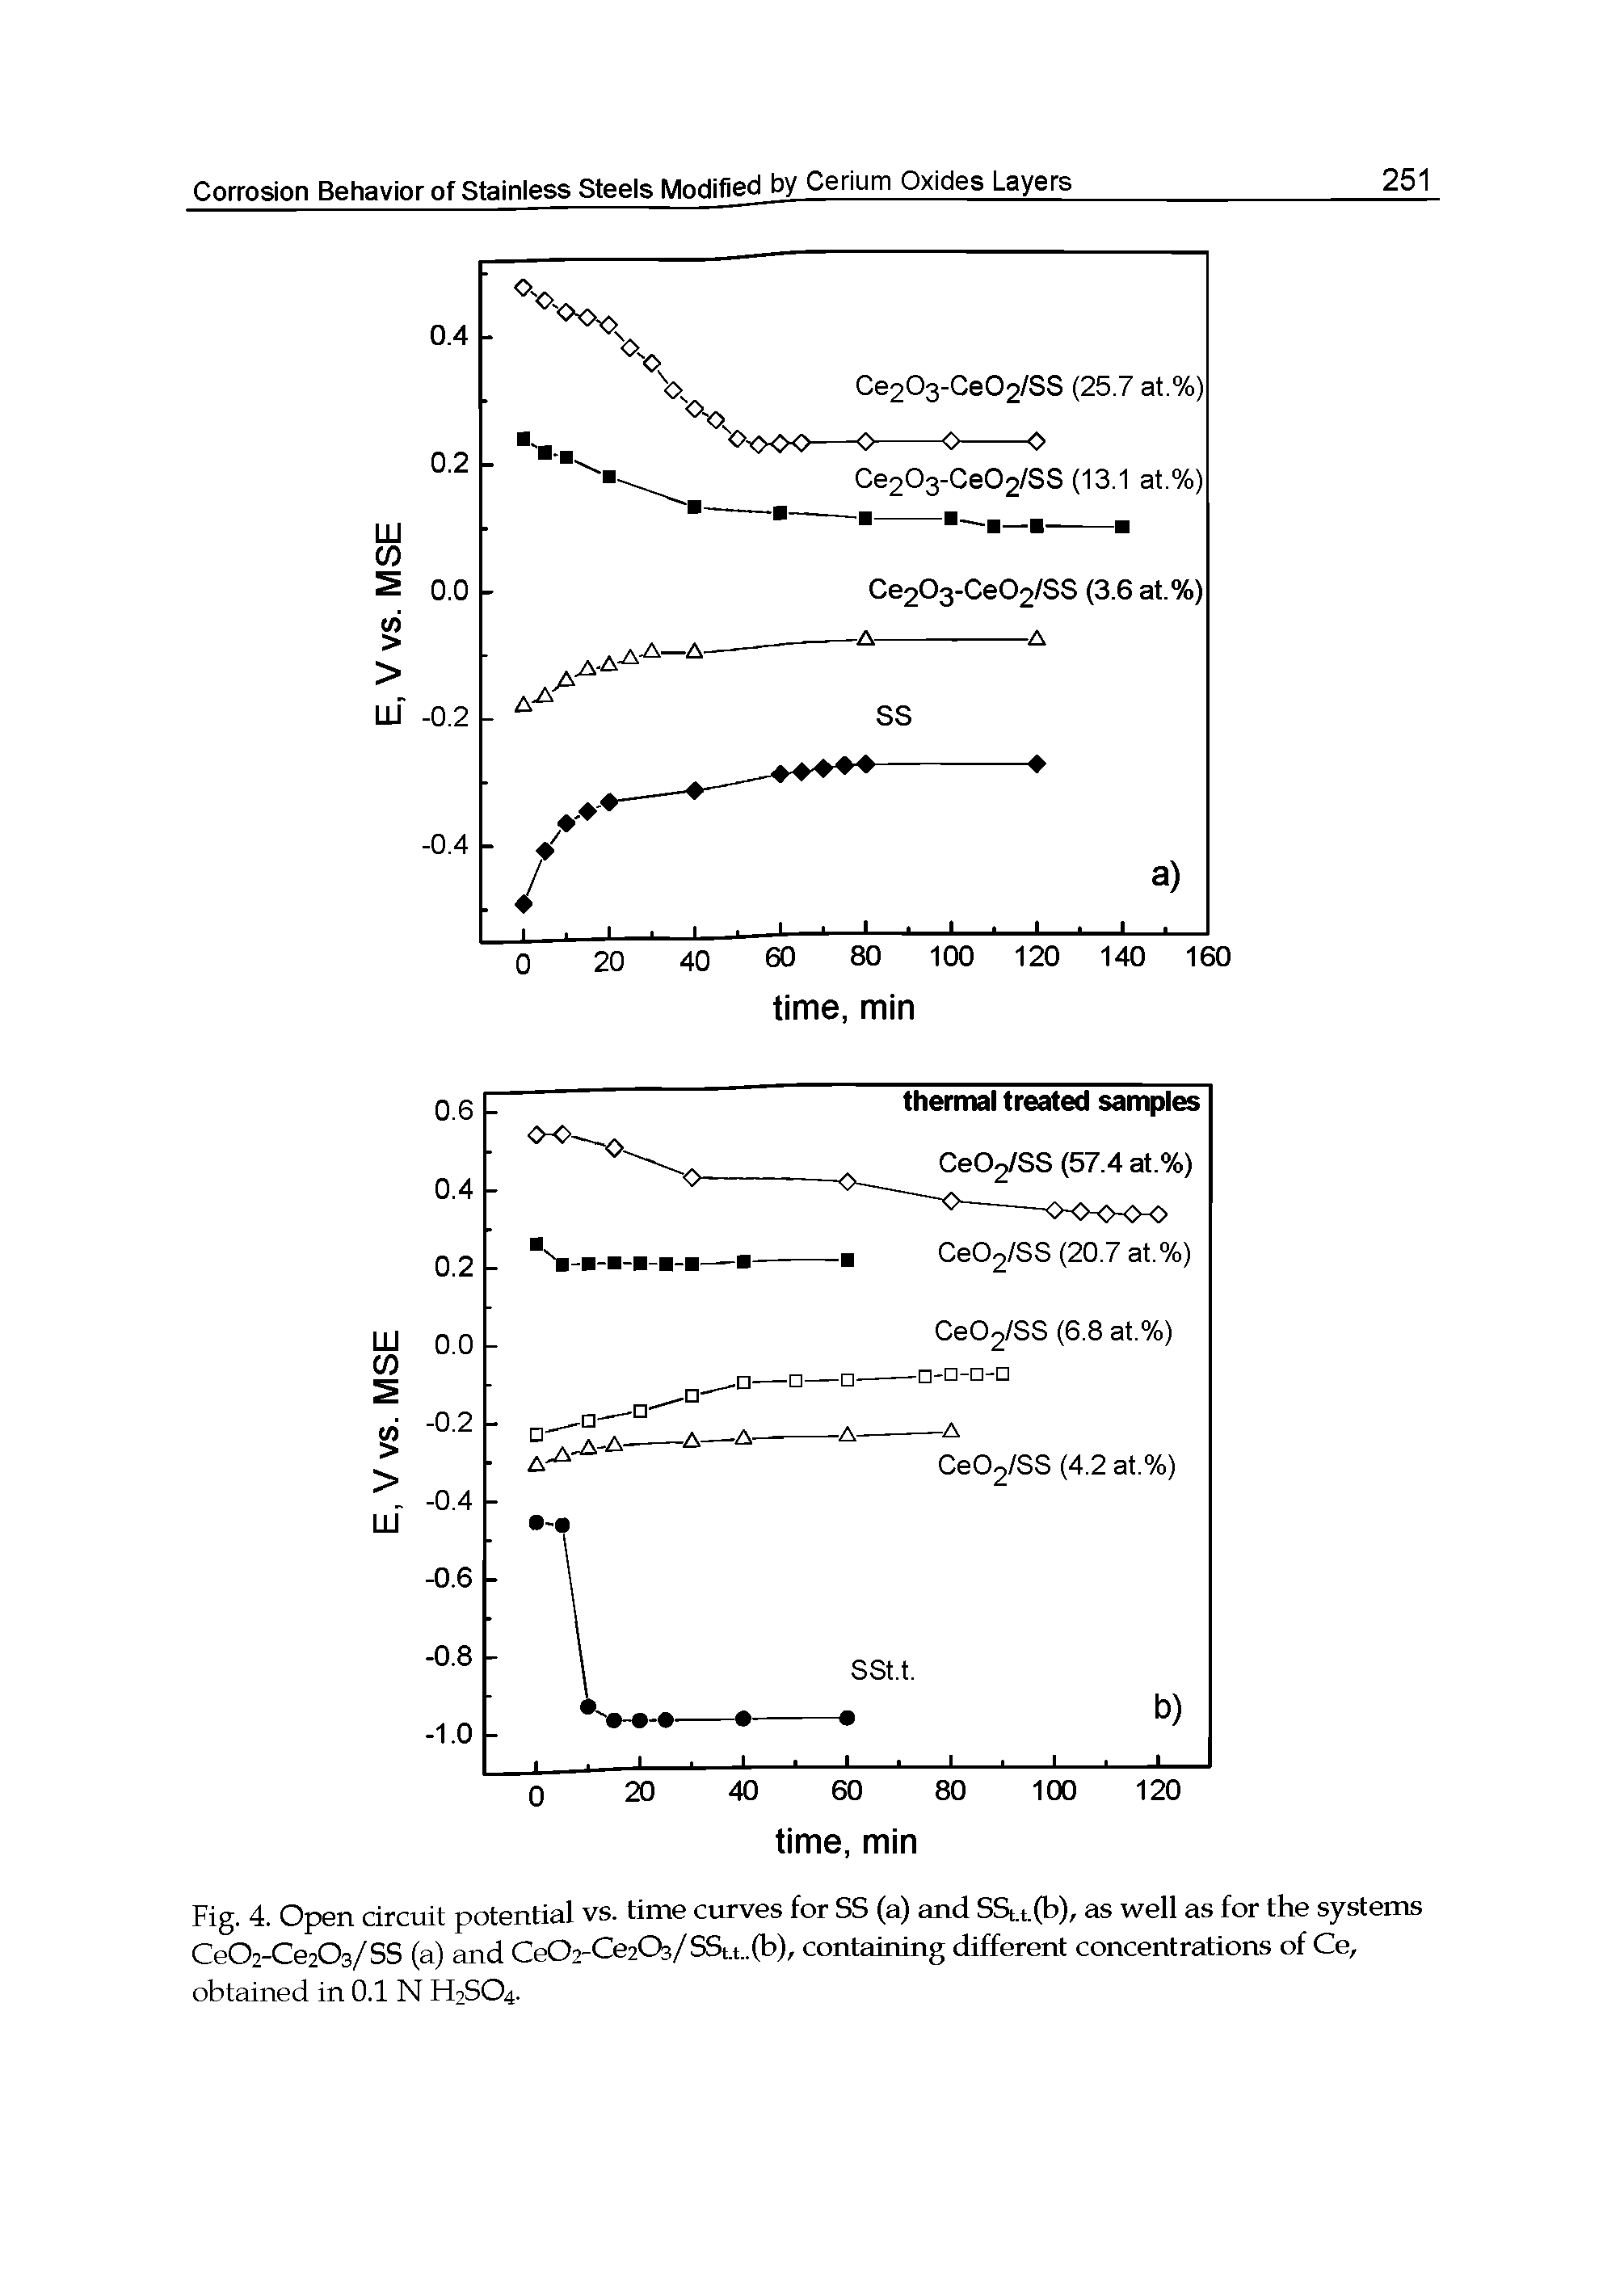 Fig. 4. Open circuit potential vs. time curves for SS (a) and SSt.t.(b), as well as for the systems Ce02-Ce203/SS (a) and Ce02-Ce203/SSi.t..(b), containing different concentrations of Ce, obtained in 0.1 N H2SO4.